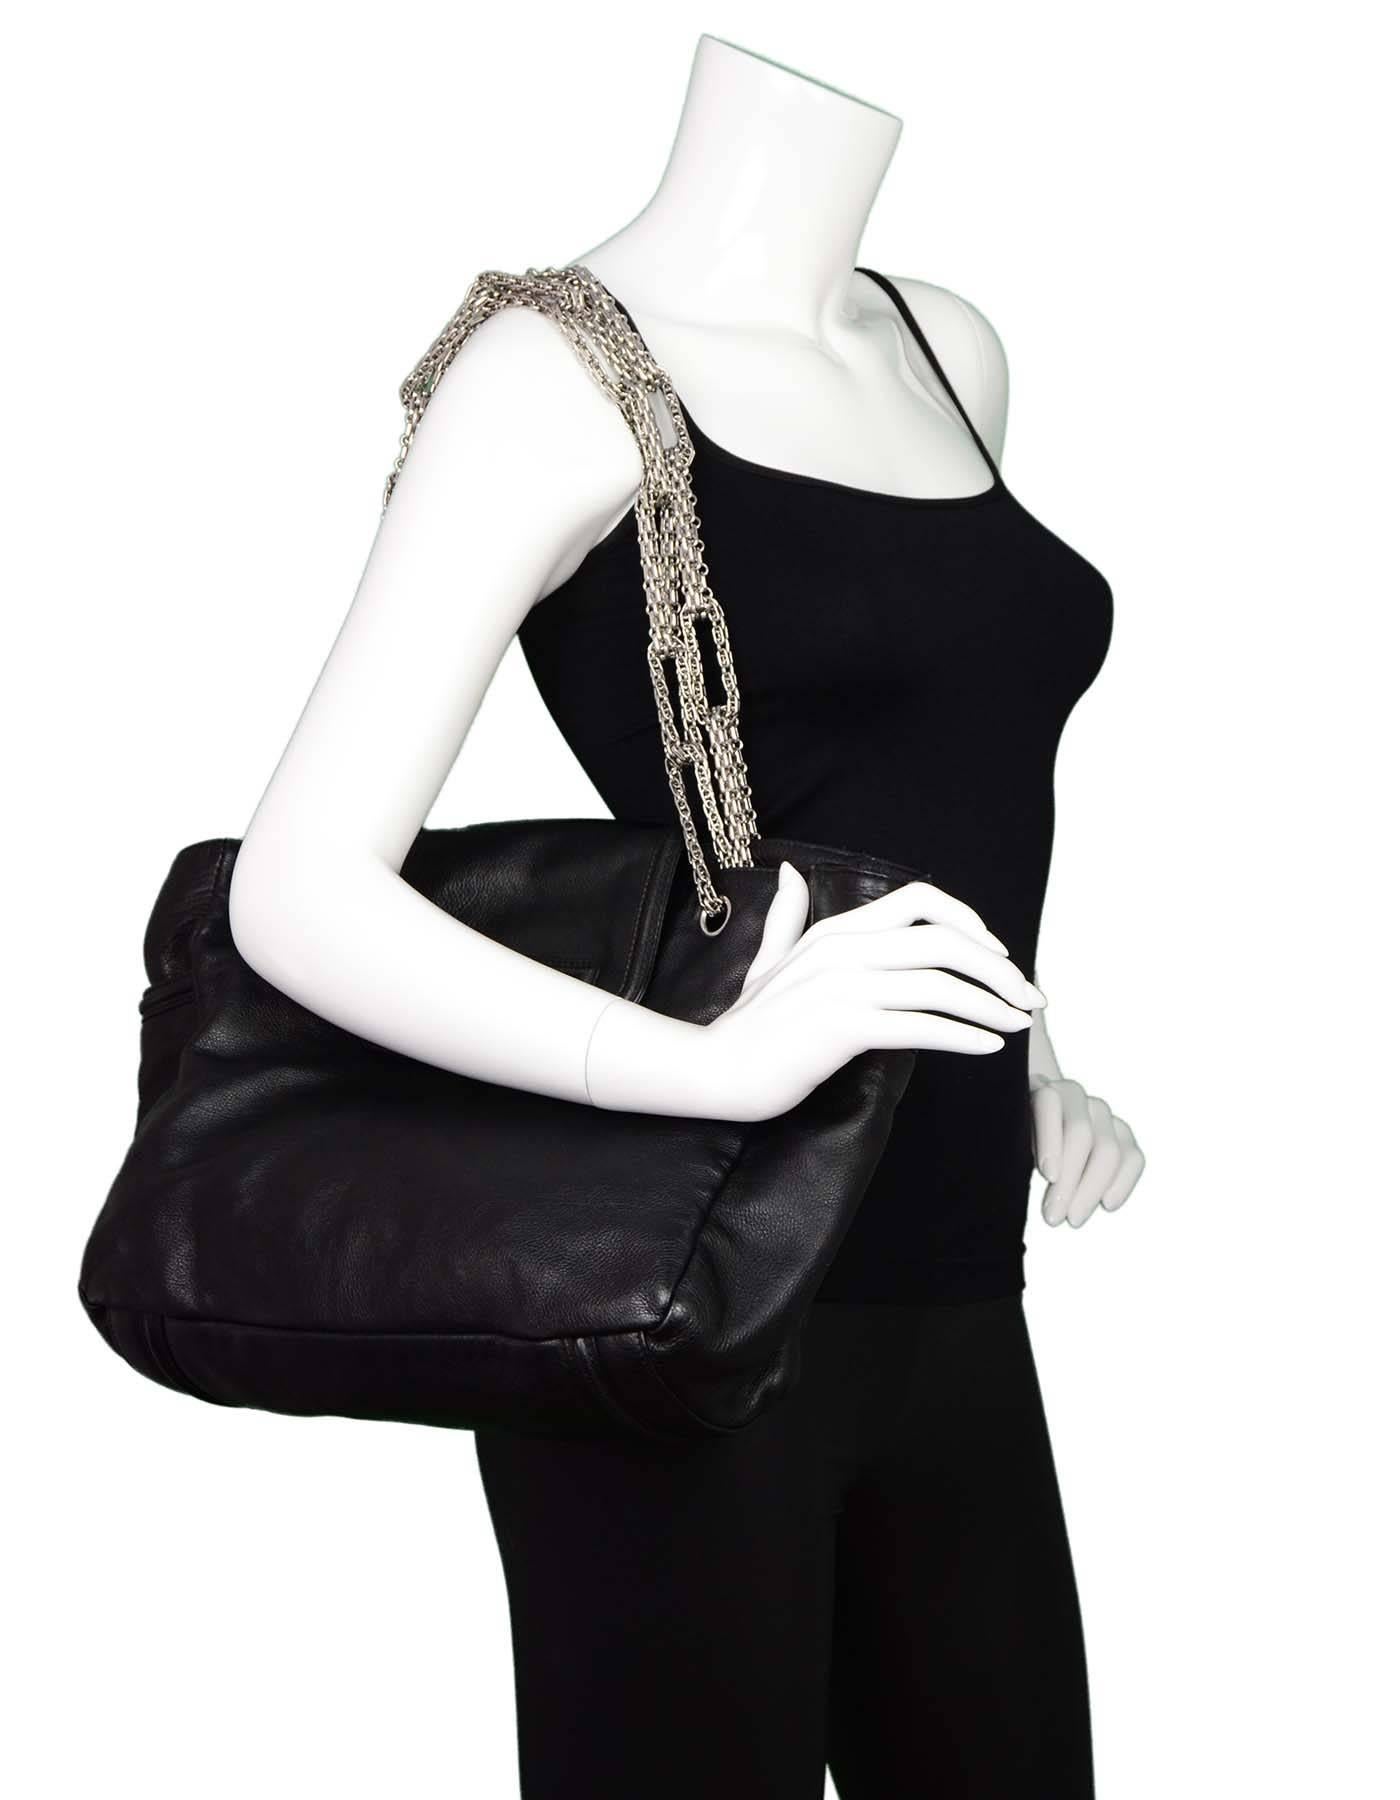 Chanel Black Leather 2.55 Reissue Lock Tote
Features large reissue twist lock at front and heavy mademoiselle chain link straps

Made In: Italy
Year of Production: 2008
Color: Black
Hardware: Silvertone
Materials: Leather, metal
Lining: Grey